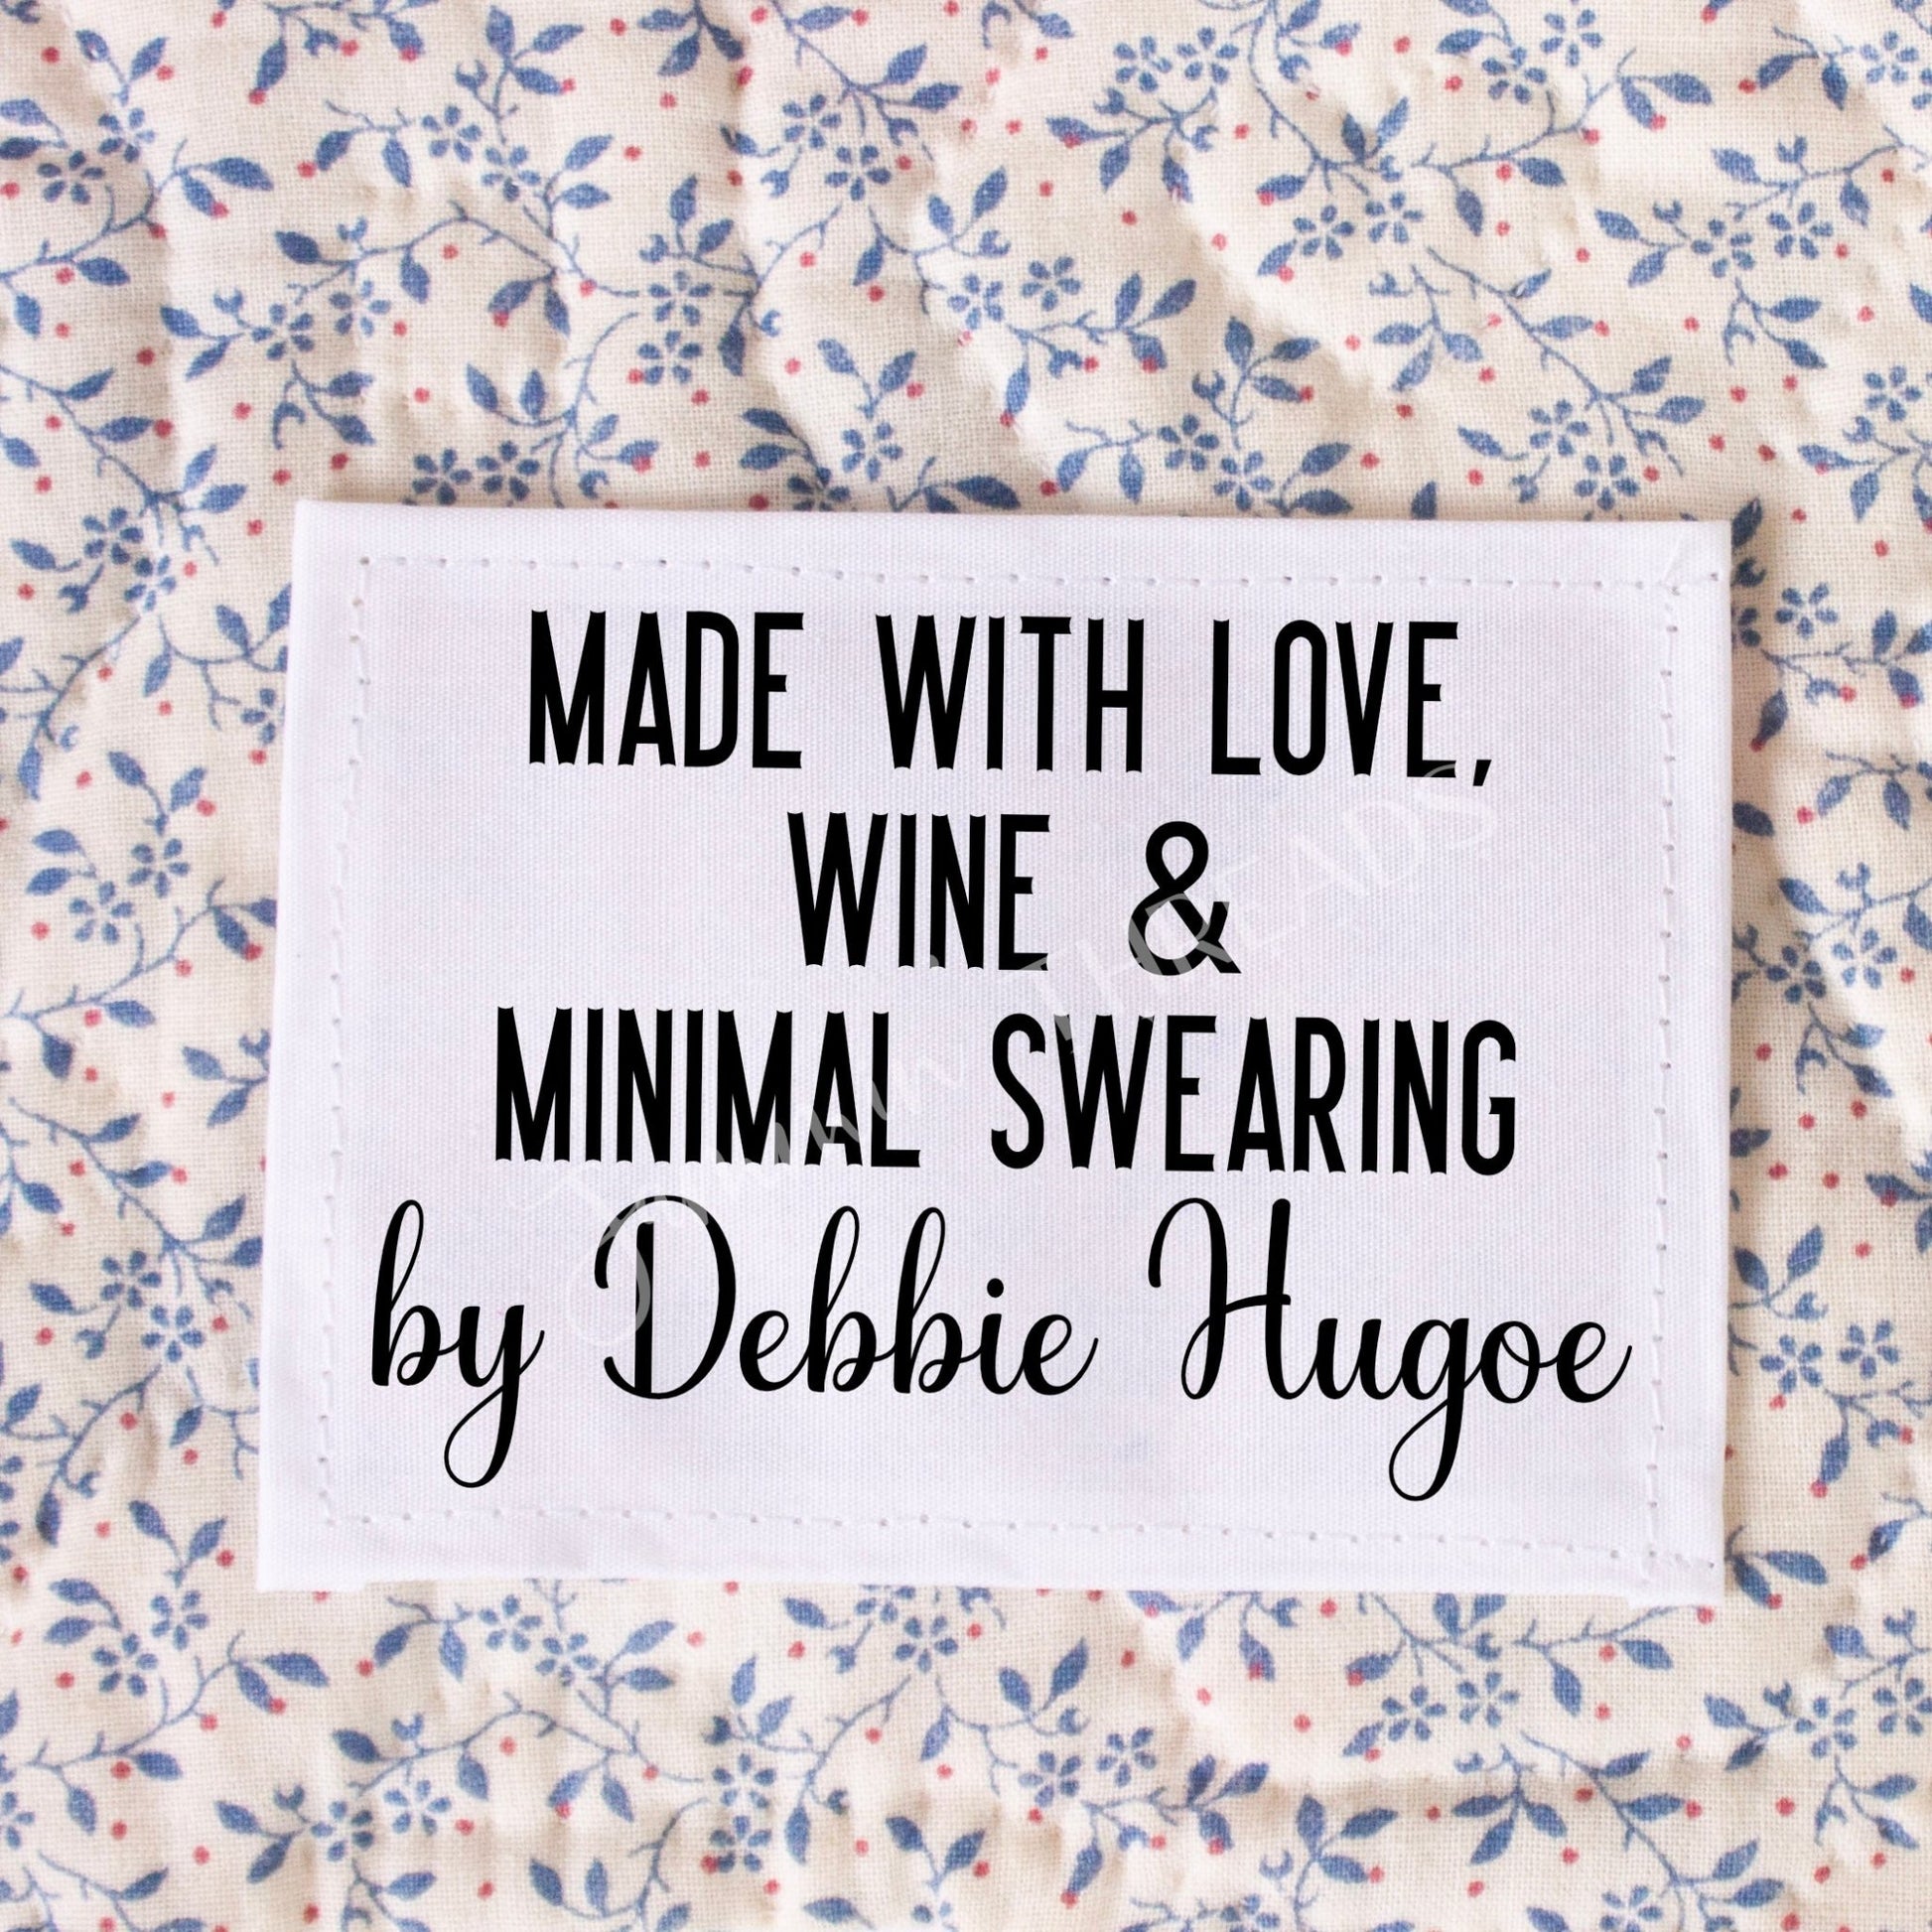 Made with Love Wine & Minimal Swearing. Funny, personalized quilt labels - Jammin Threads